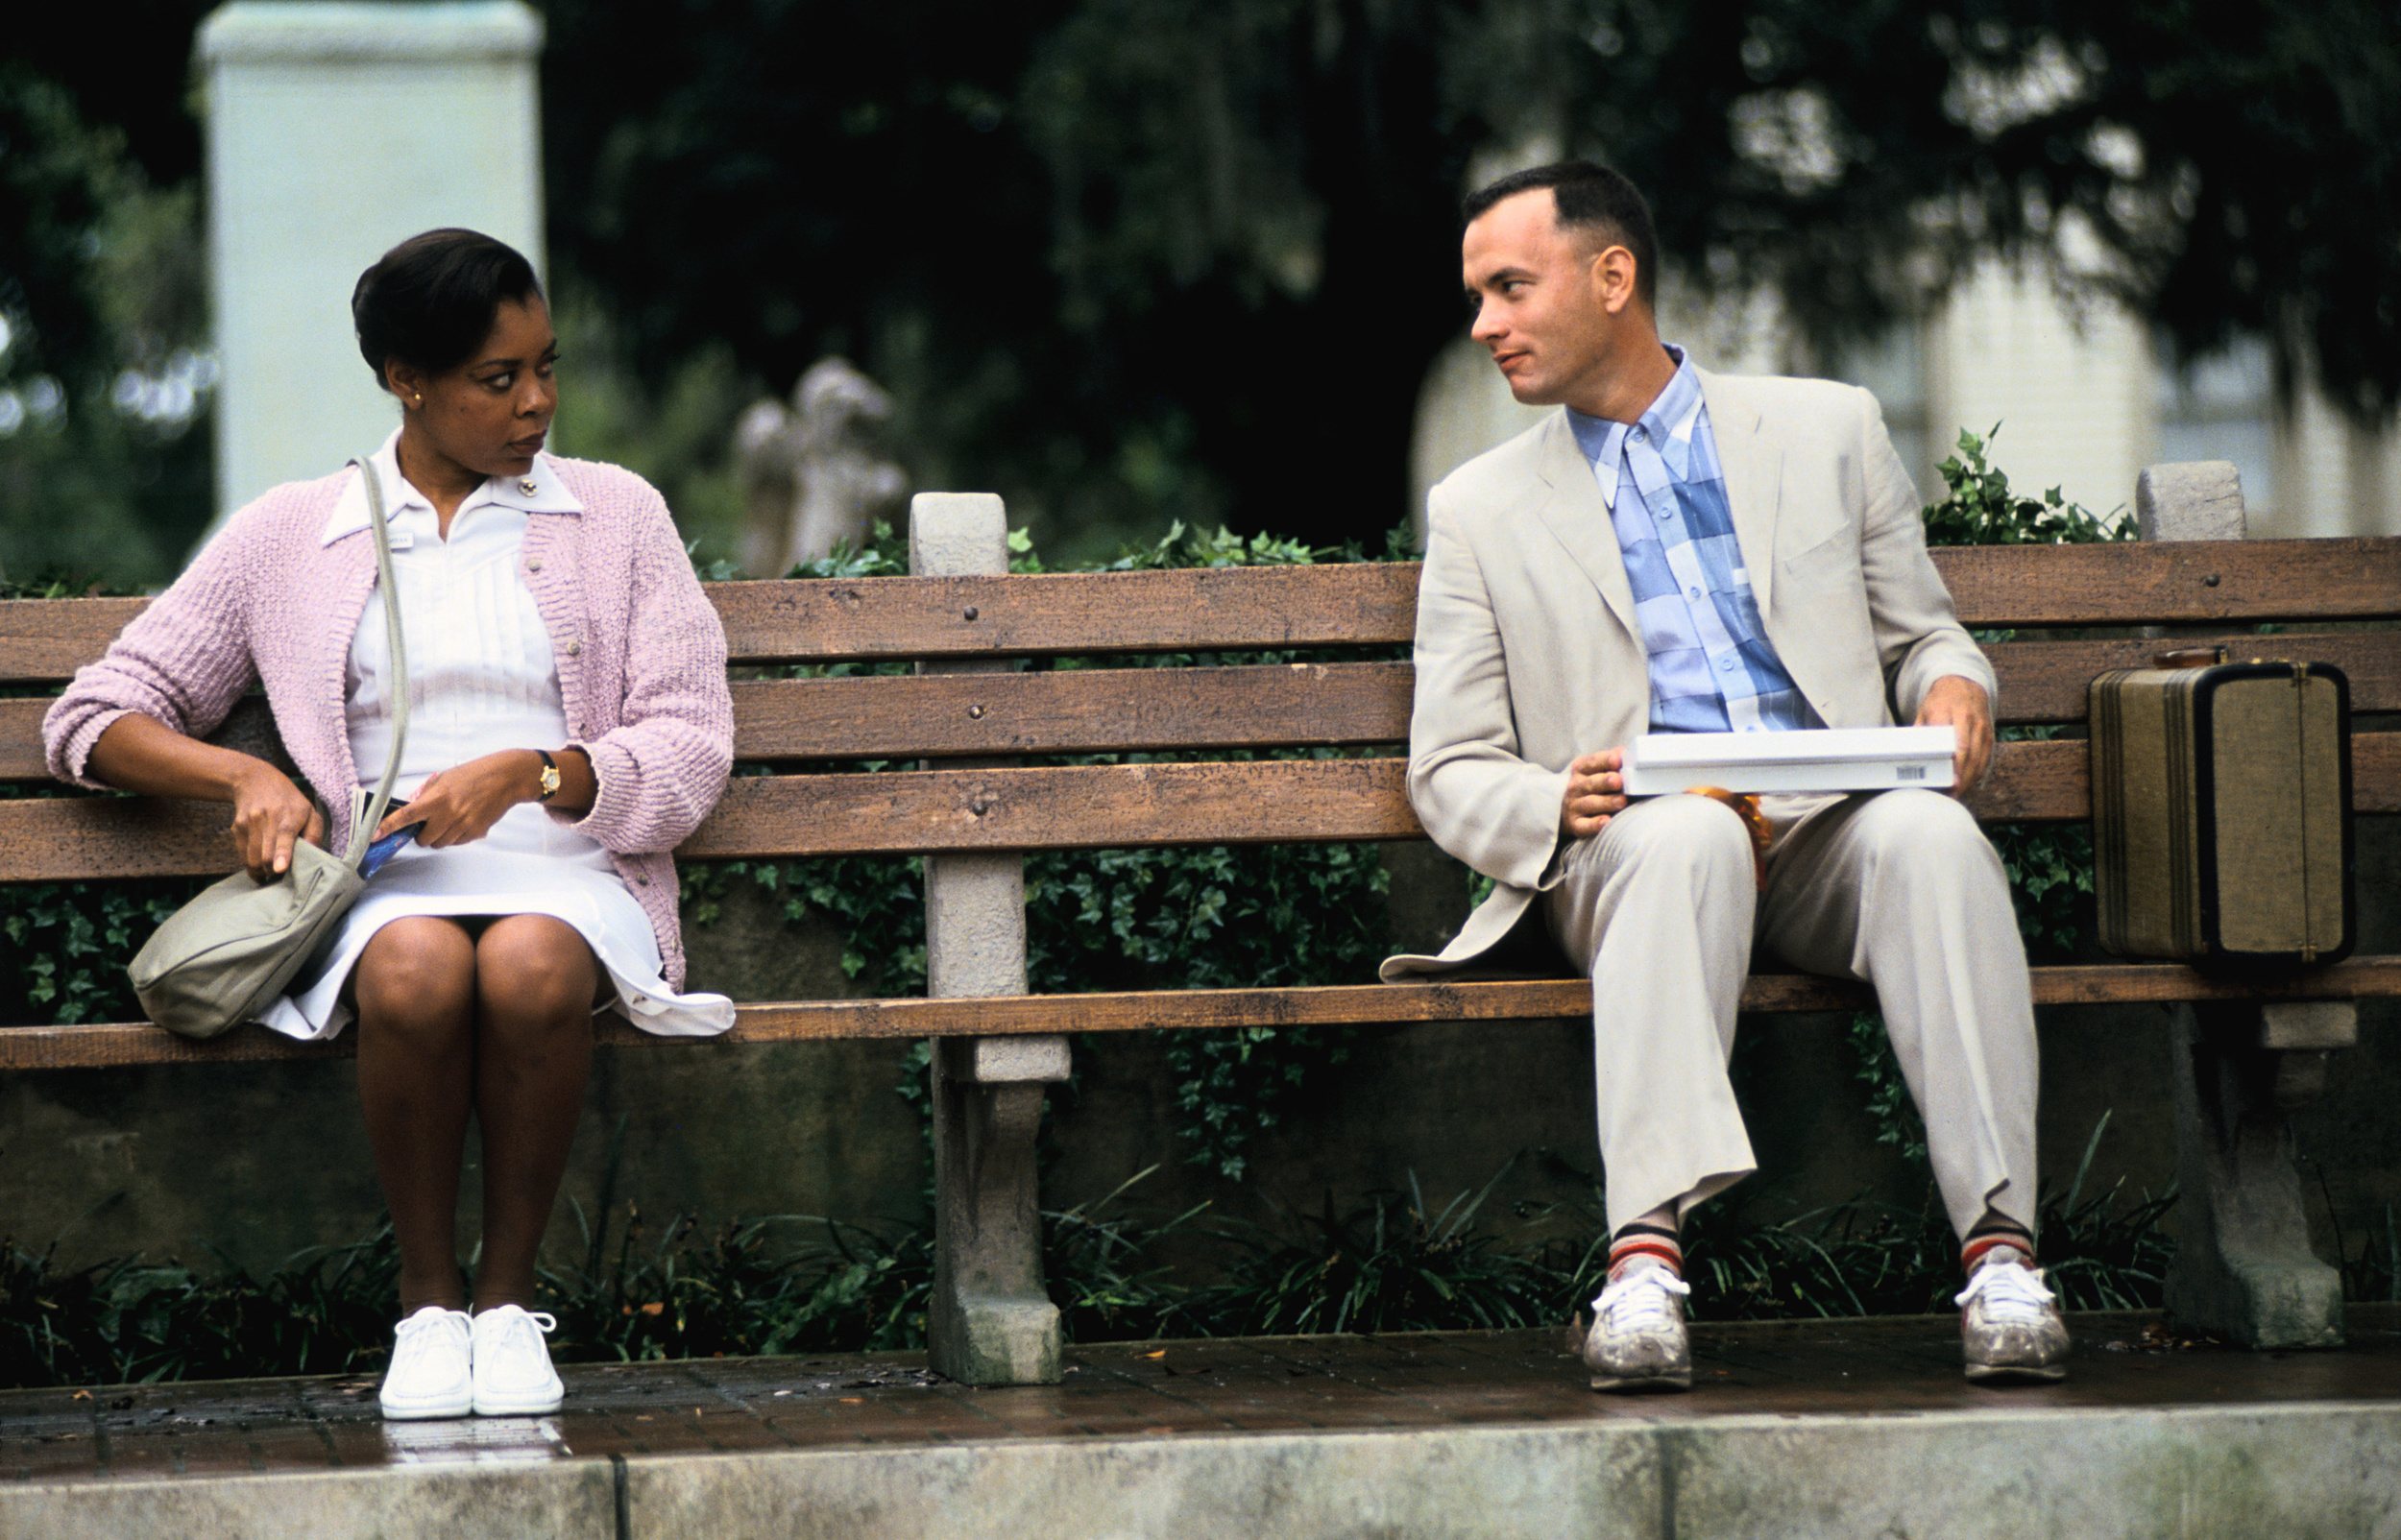 <p>One line from <em>Forrest Gump</em> ended up on AFI’s list of iconic movie quotes. You know the line: “Mama says life is like a box of chocolates.” Ah, but that’s not the actual quote. In the movie, Forrest says, “Mama always said life was like a box of chocolates. You never know what you’re gonna get.” So yeah, maybe you were slightly off. In the book, the line Forrest says, “Being an idiot is no box of chocolates.”</p><p>You may also like: <a href='https://www.yardbarker.com/entertainment/articles/the_most_famous_acting_families_of_all_time/s1__30829385'>The most famous acting families of all time</a></p>